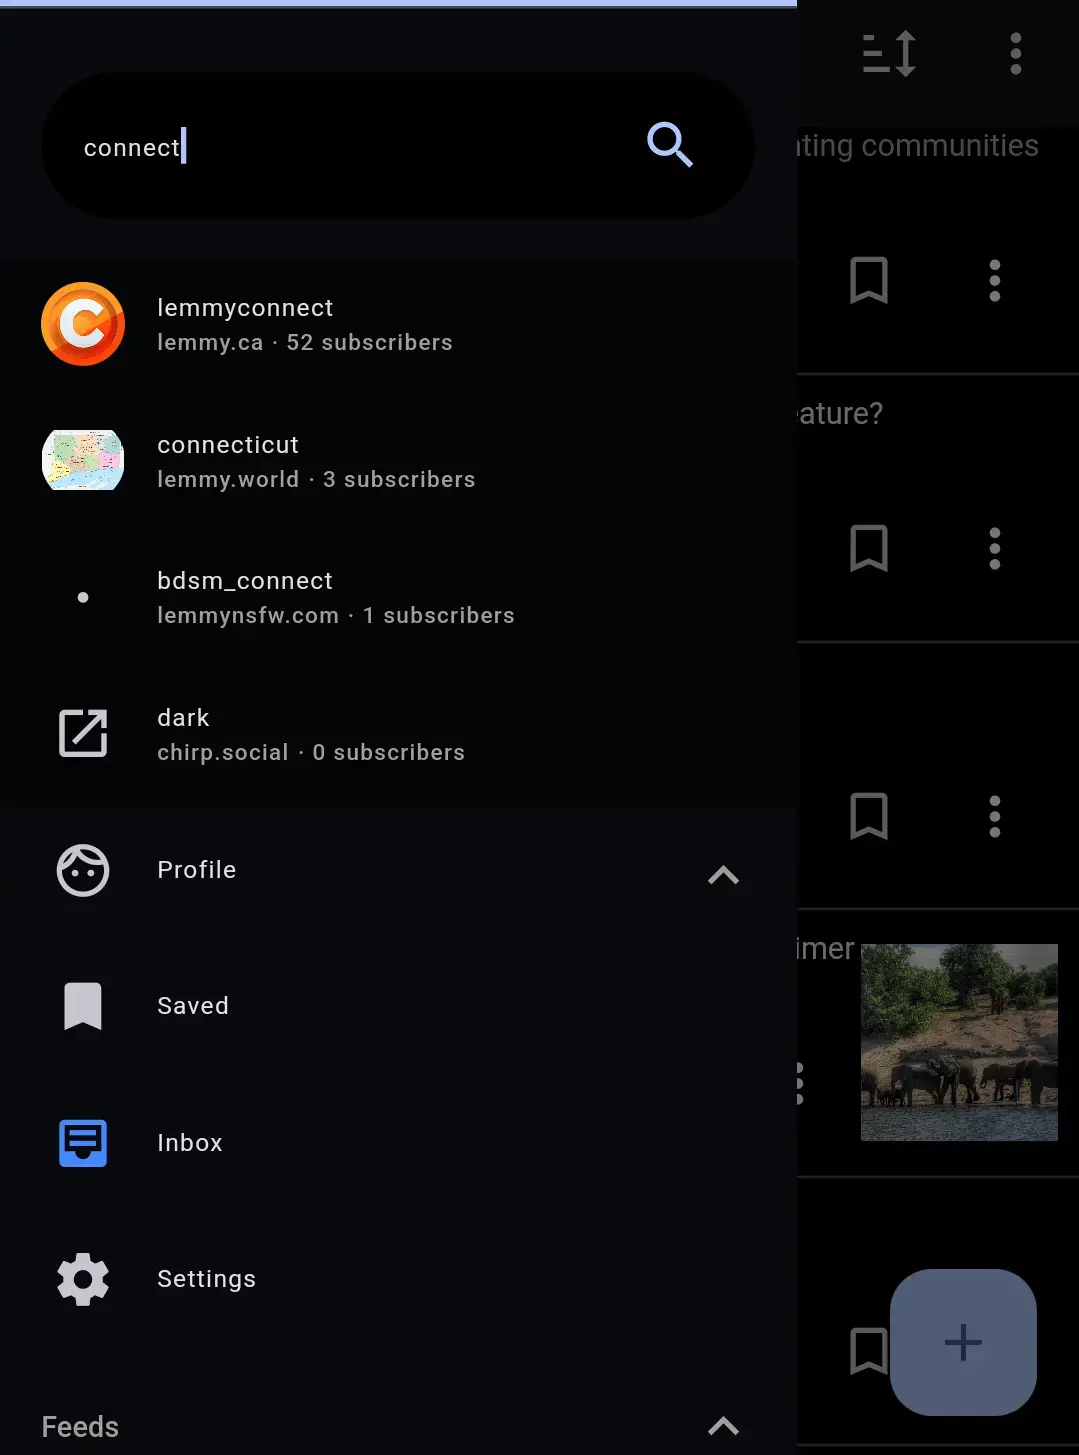 screenshot of searching for the Connect community in the sidebar